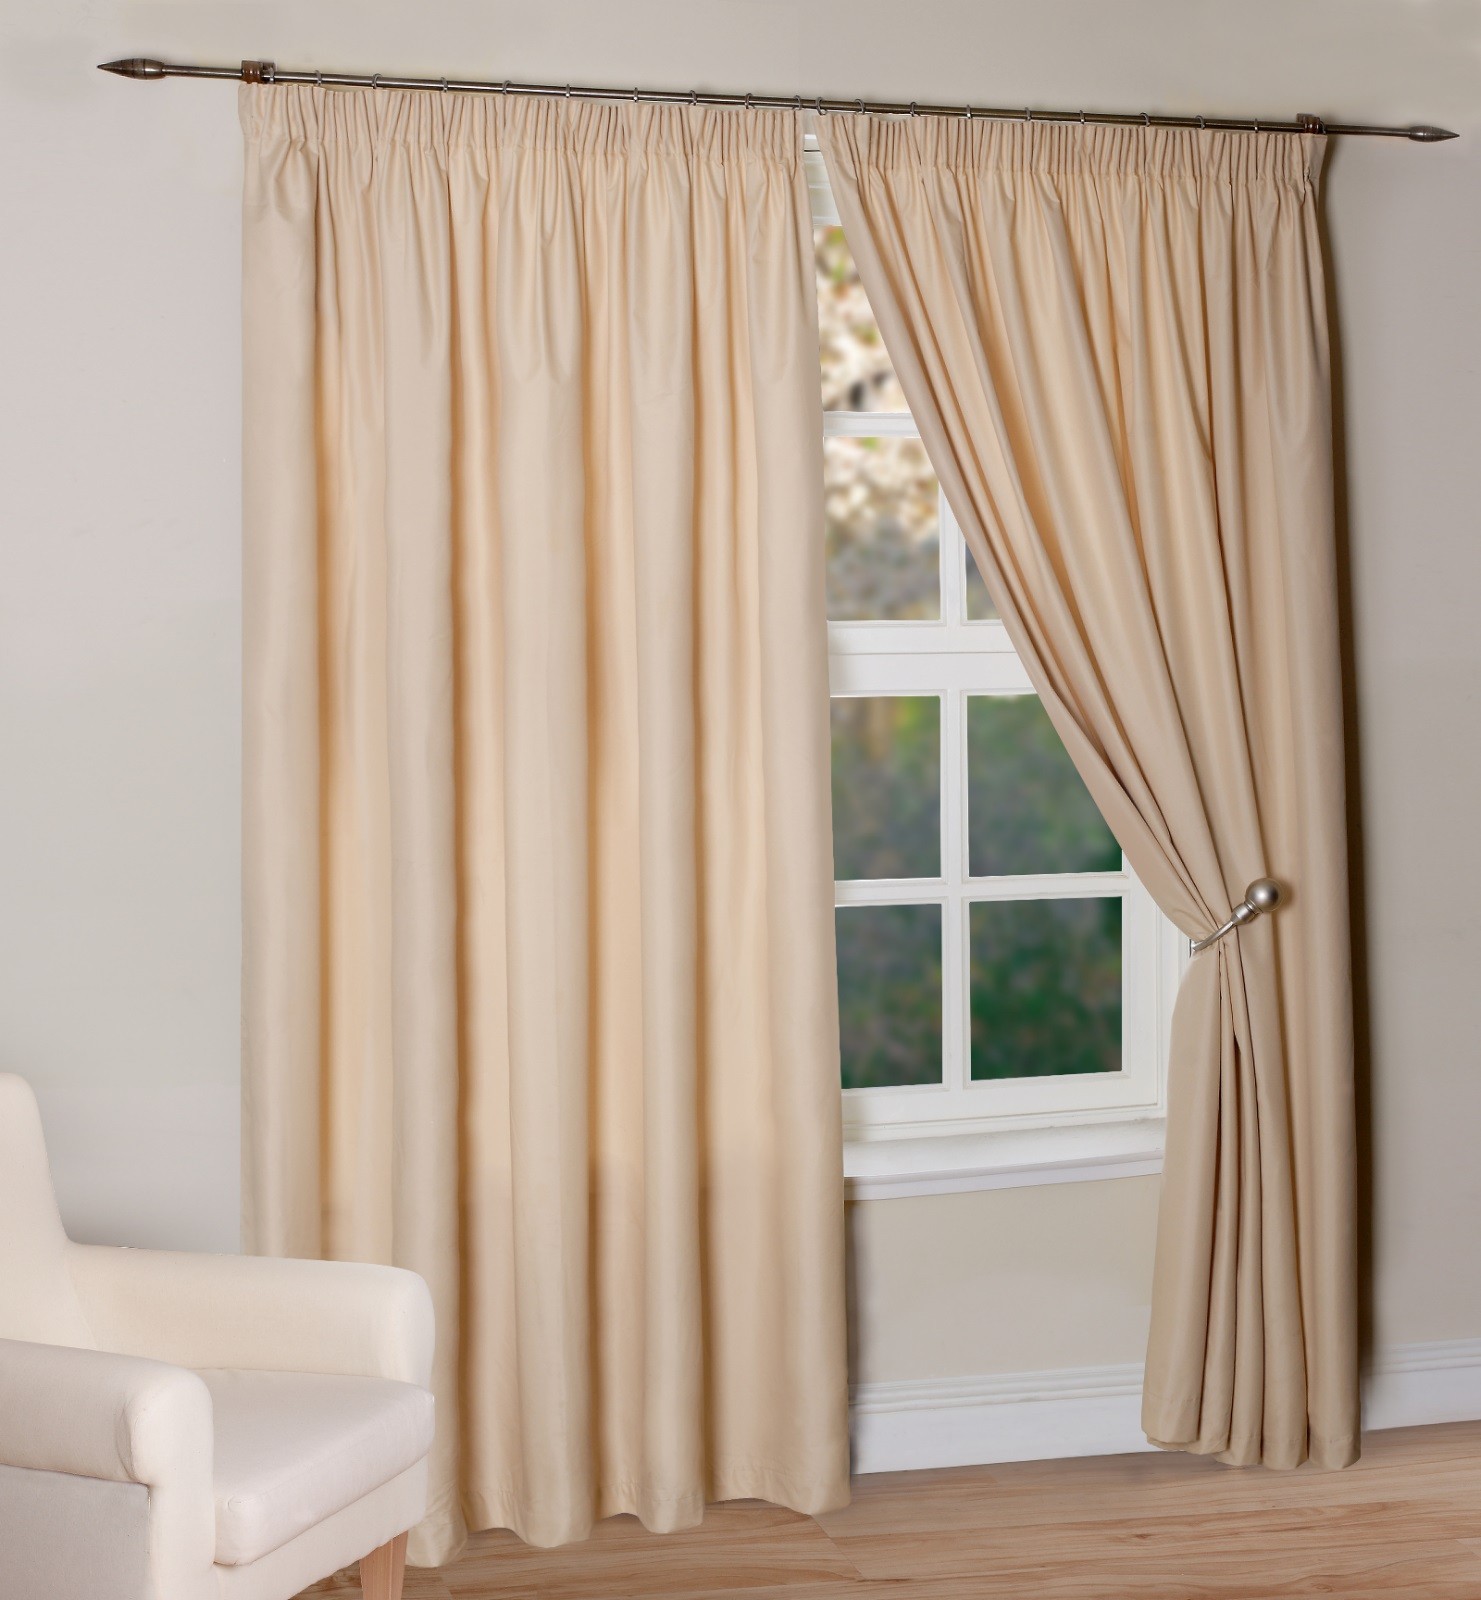 Thermal backed curtains in Furniture Ideas | DeltaAngelGroup ...